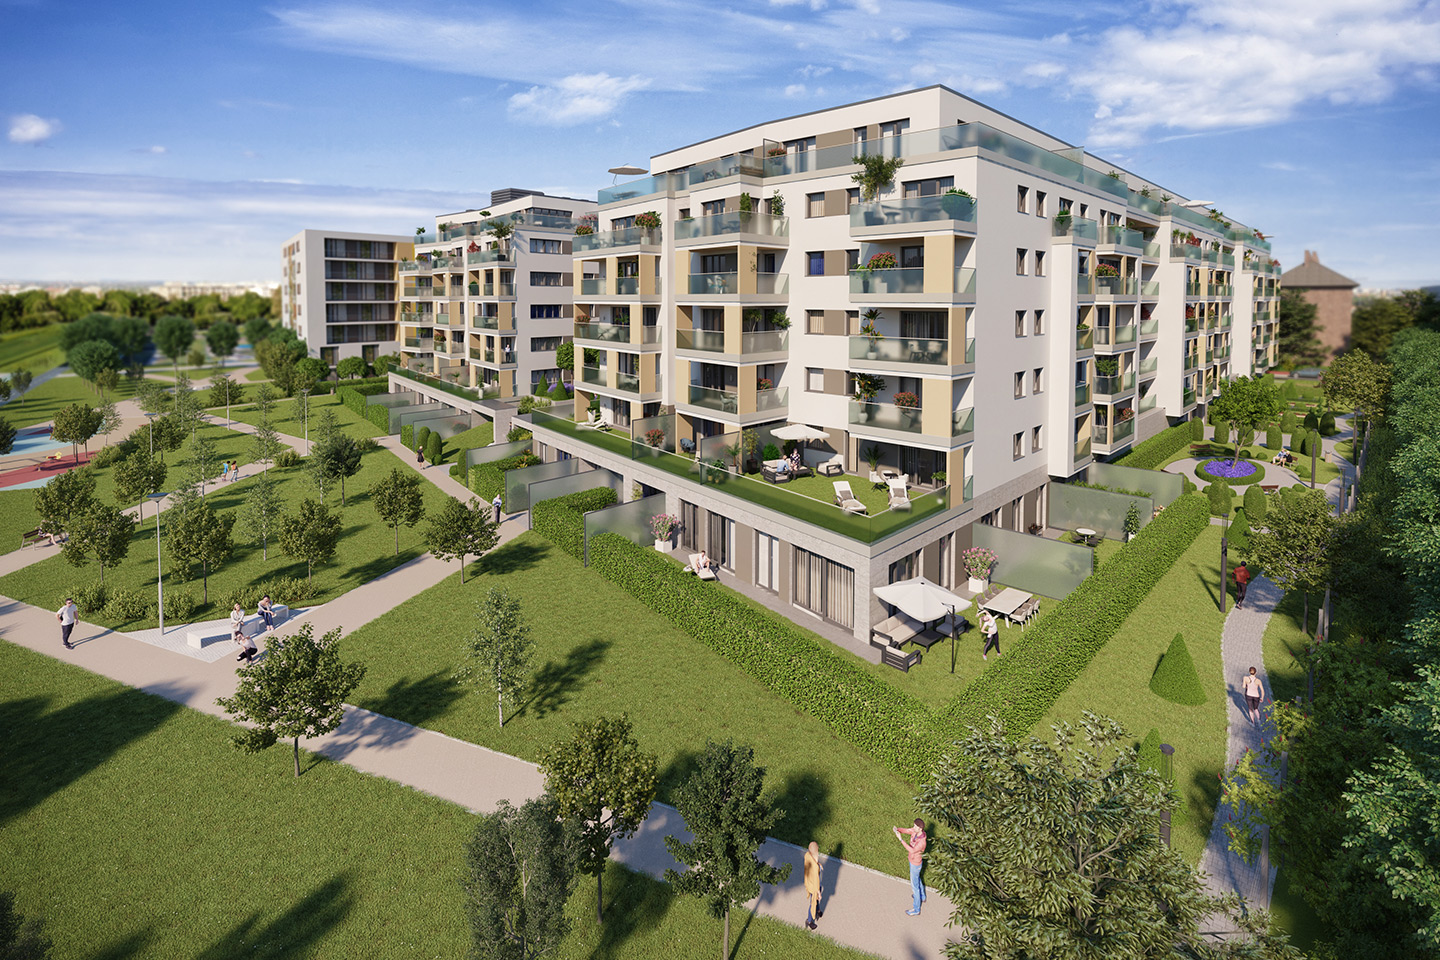 The first phase of LIVING’s Le Jardin residential development has reached its highest point